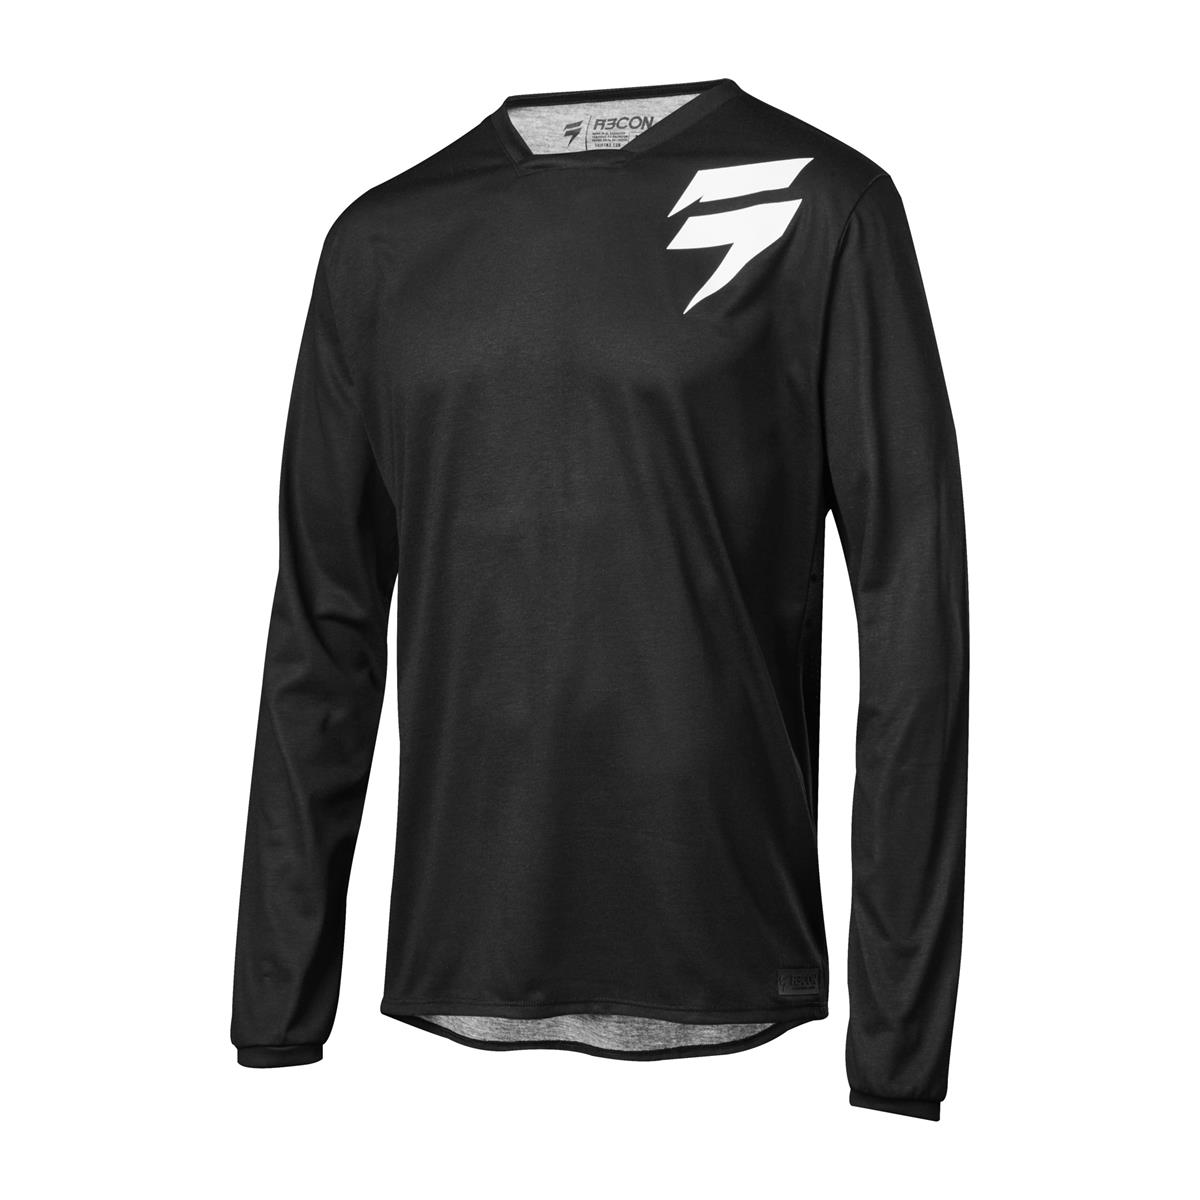 Shift Jersey Recon Muse Black